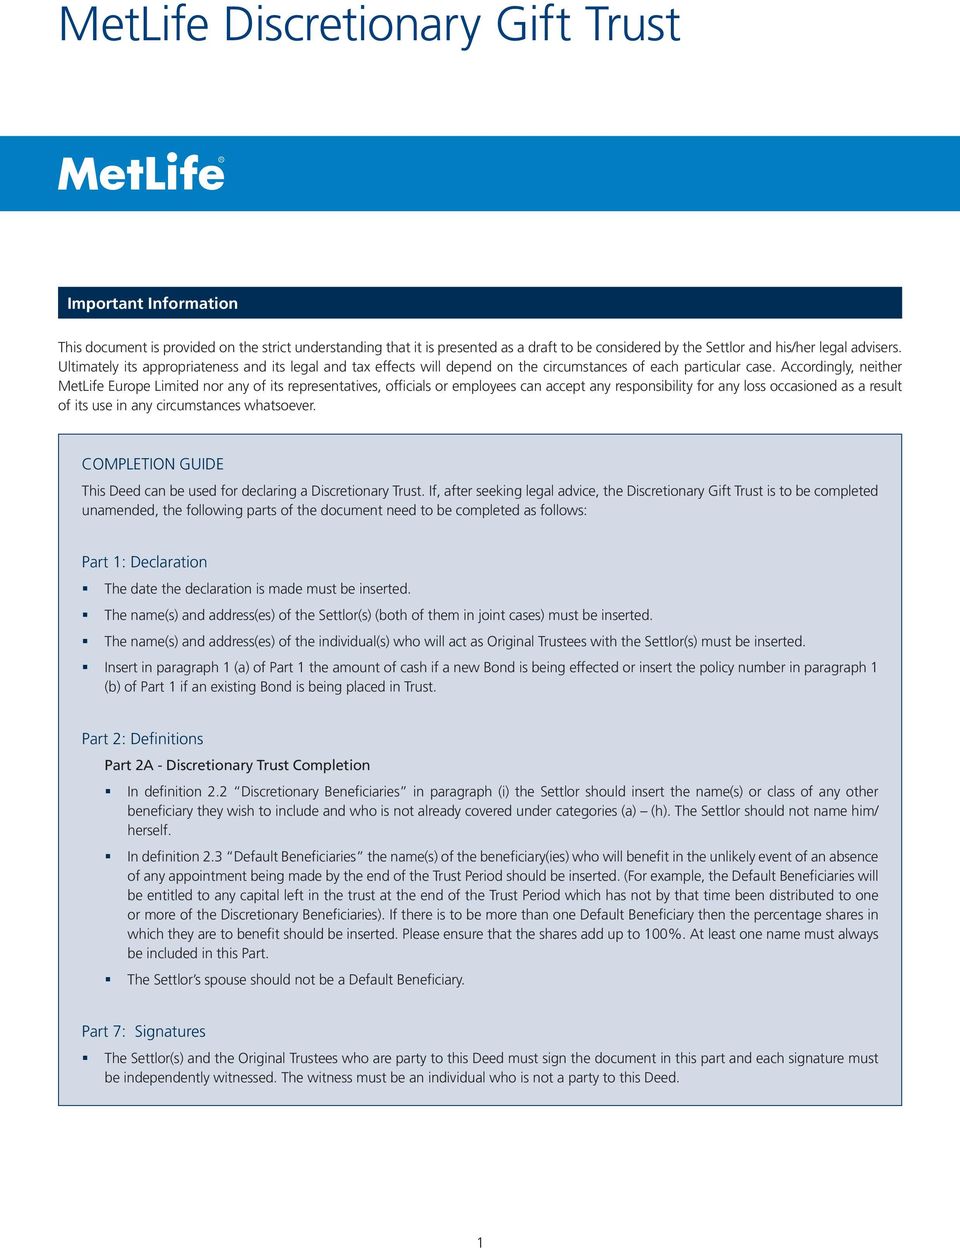 Accordingly, neither MetLife Europe Limited nor any of its representatives, officials or employees can accept any responsibility for any loss occasioned as a result of its use in any circumstances